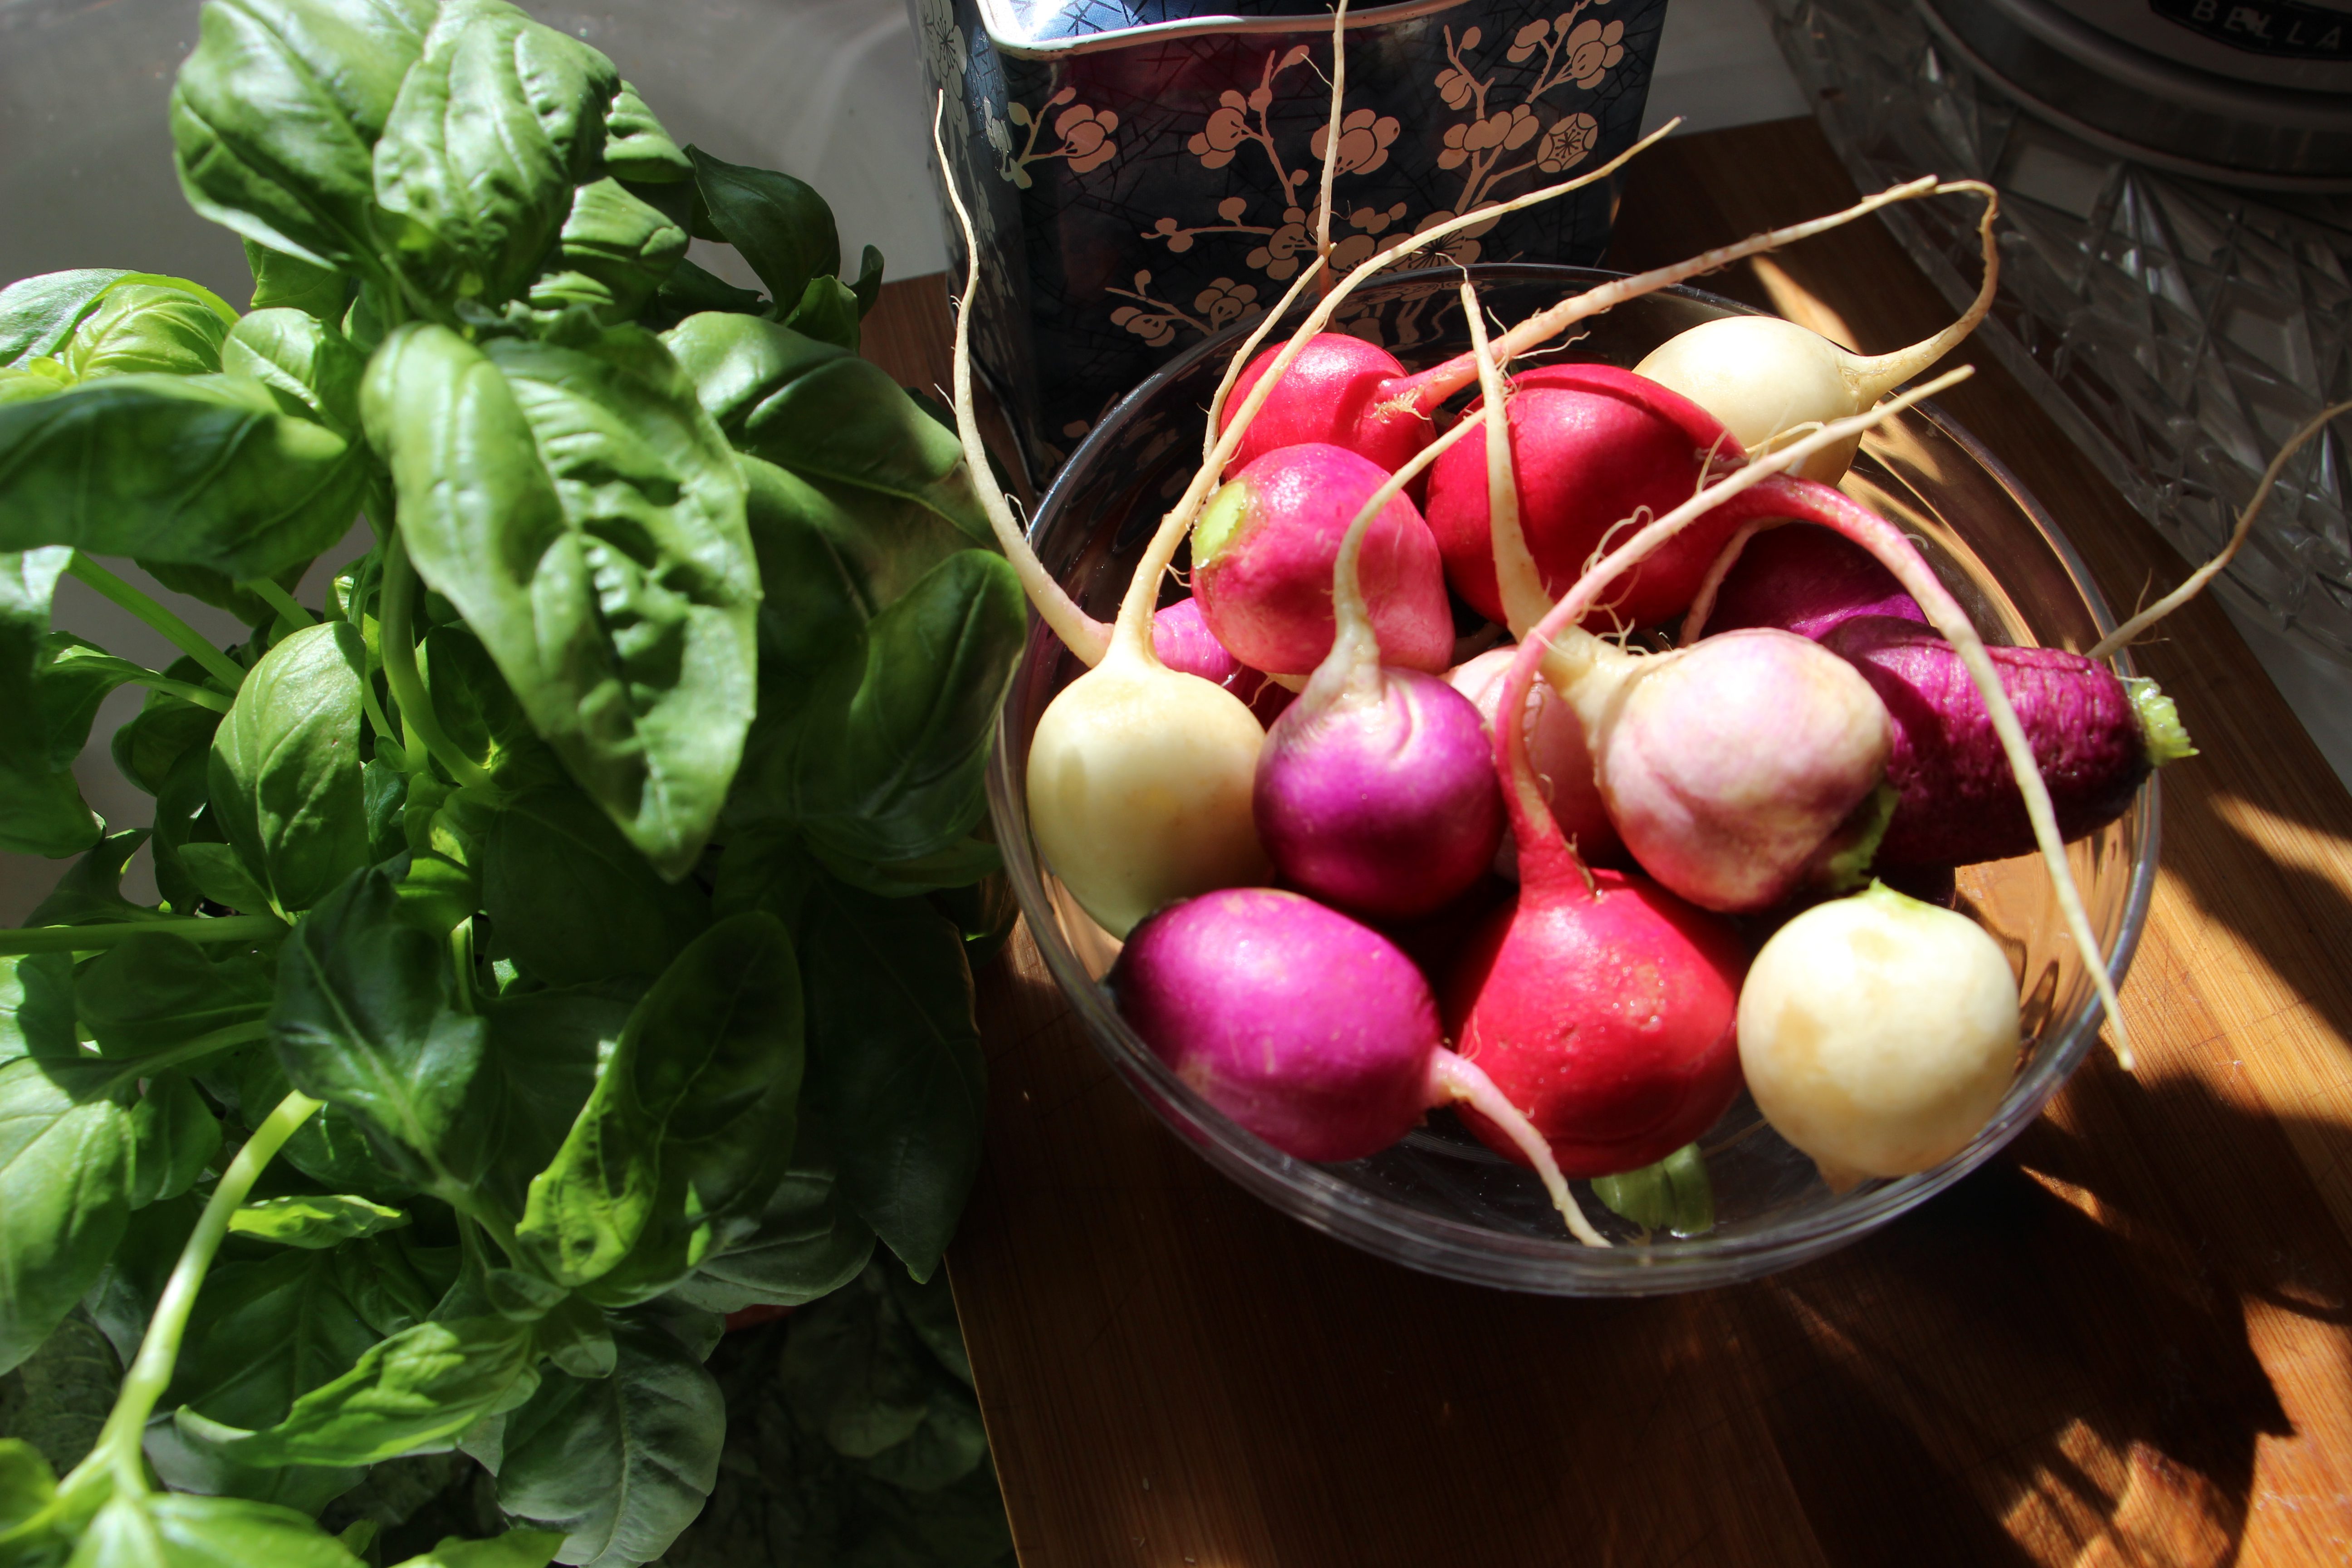 Roasted radishes are a sweet surprise